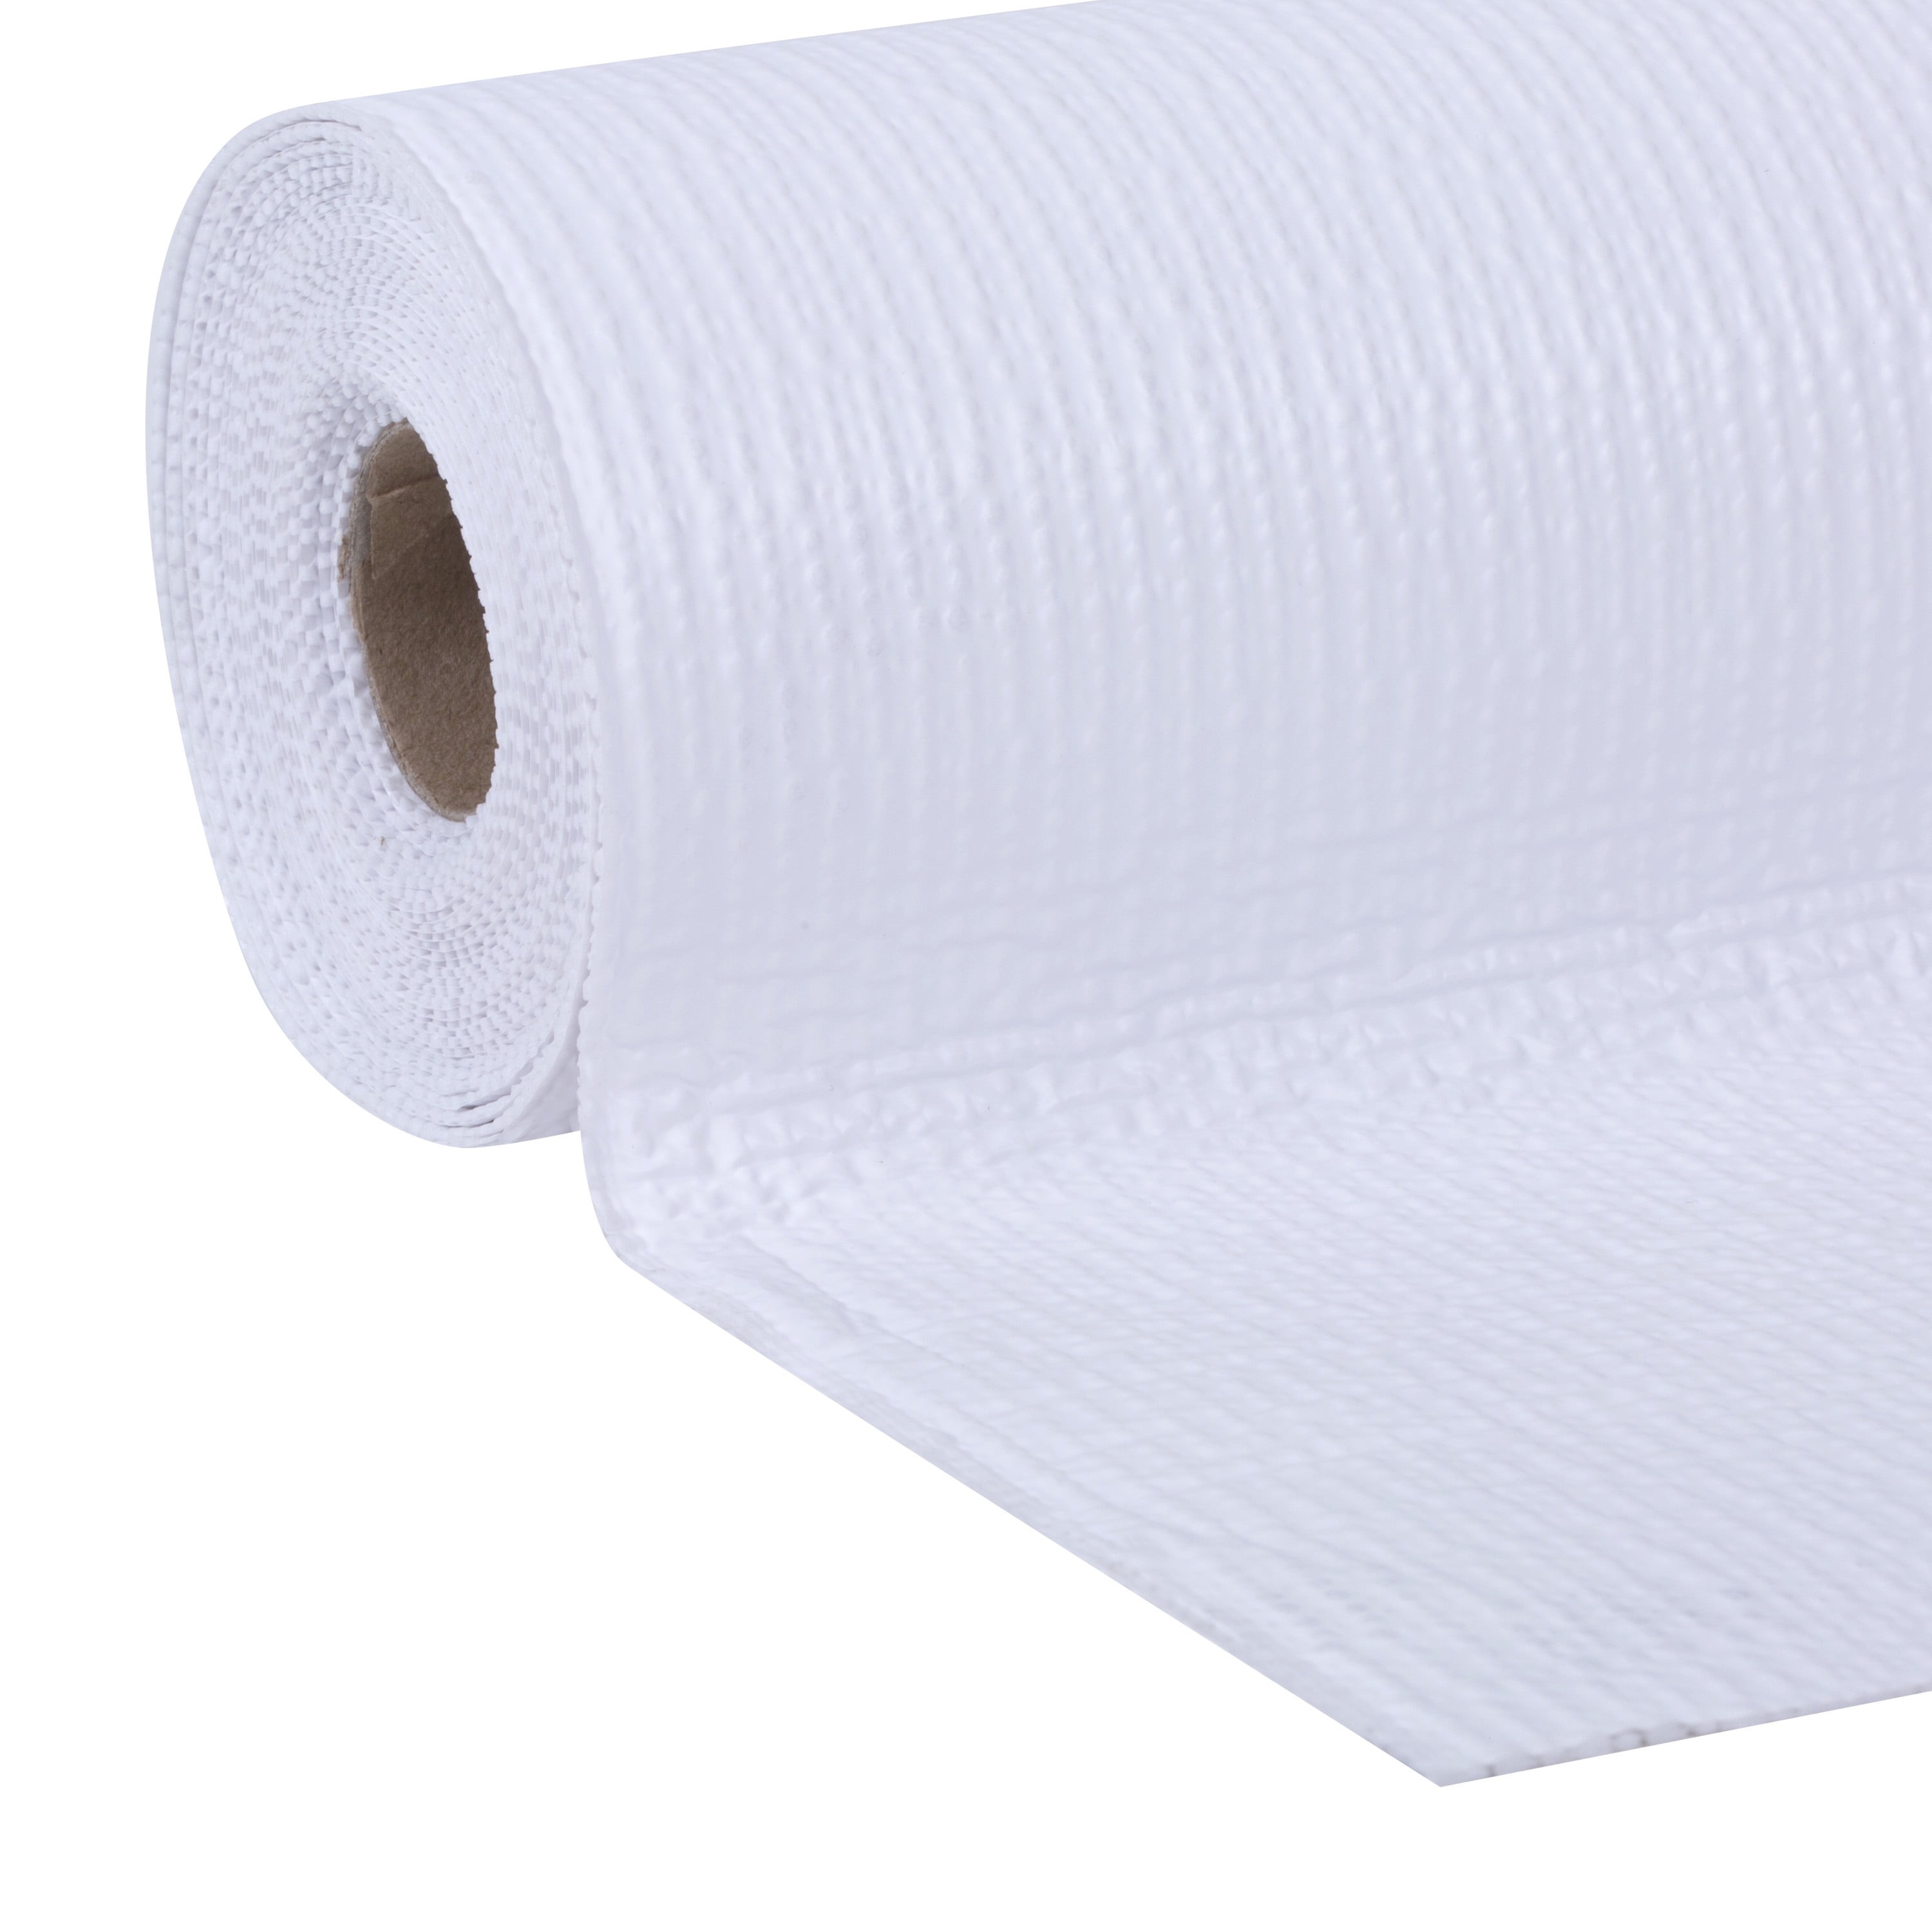 EasyLiner Smooth Top 20 in. x 18 ft. Shelf Liner, White